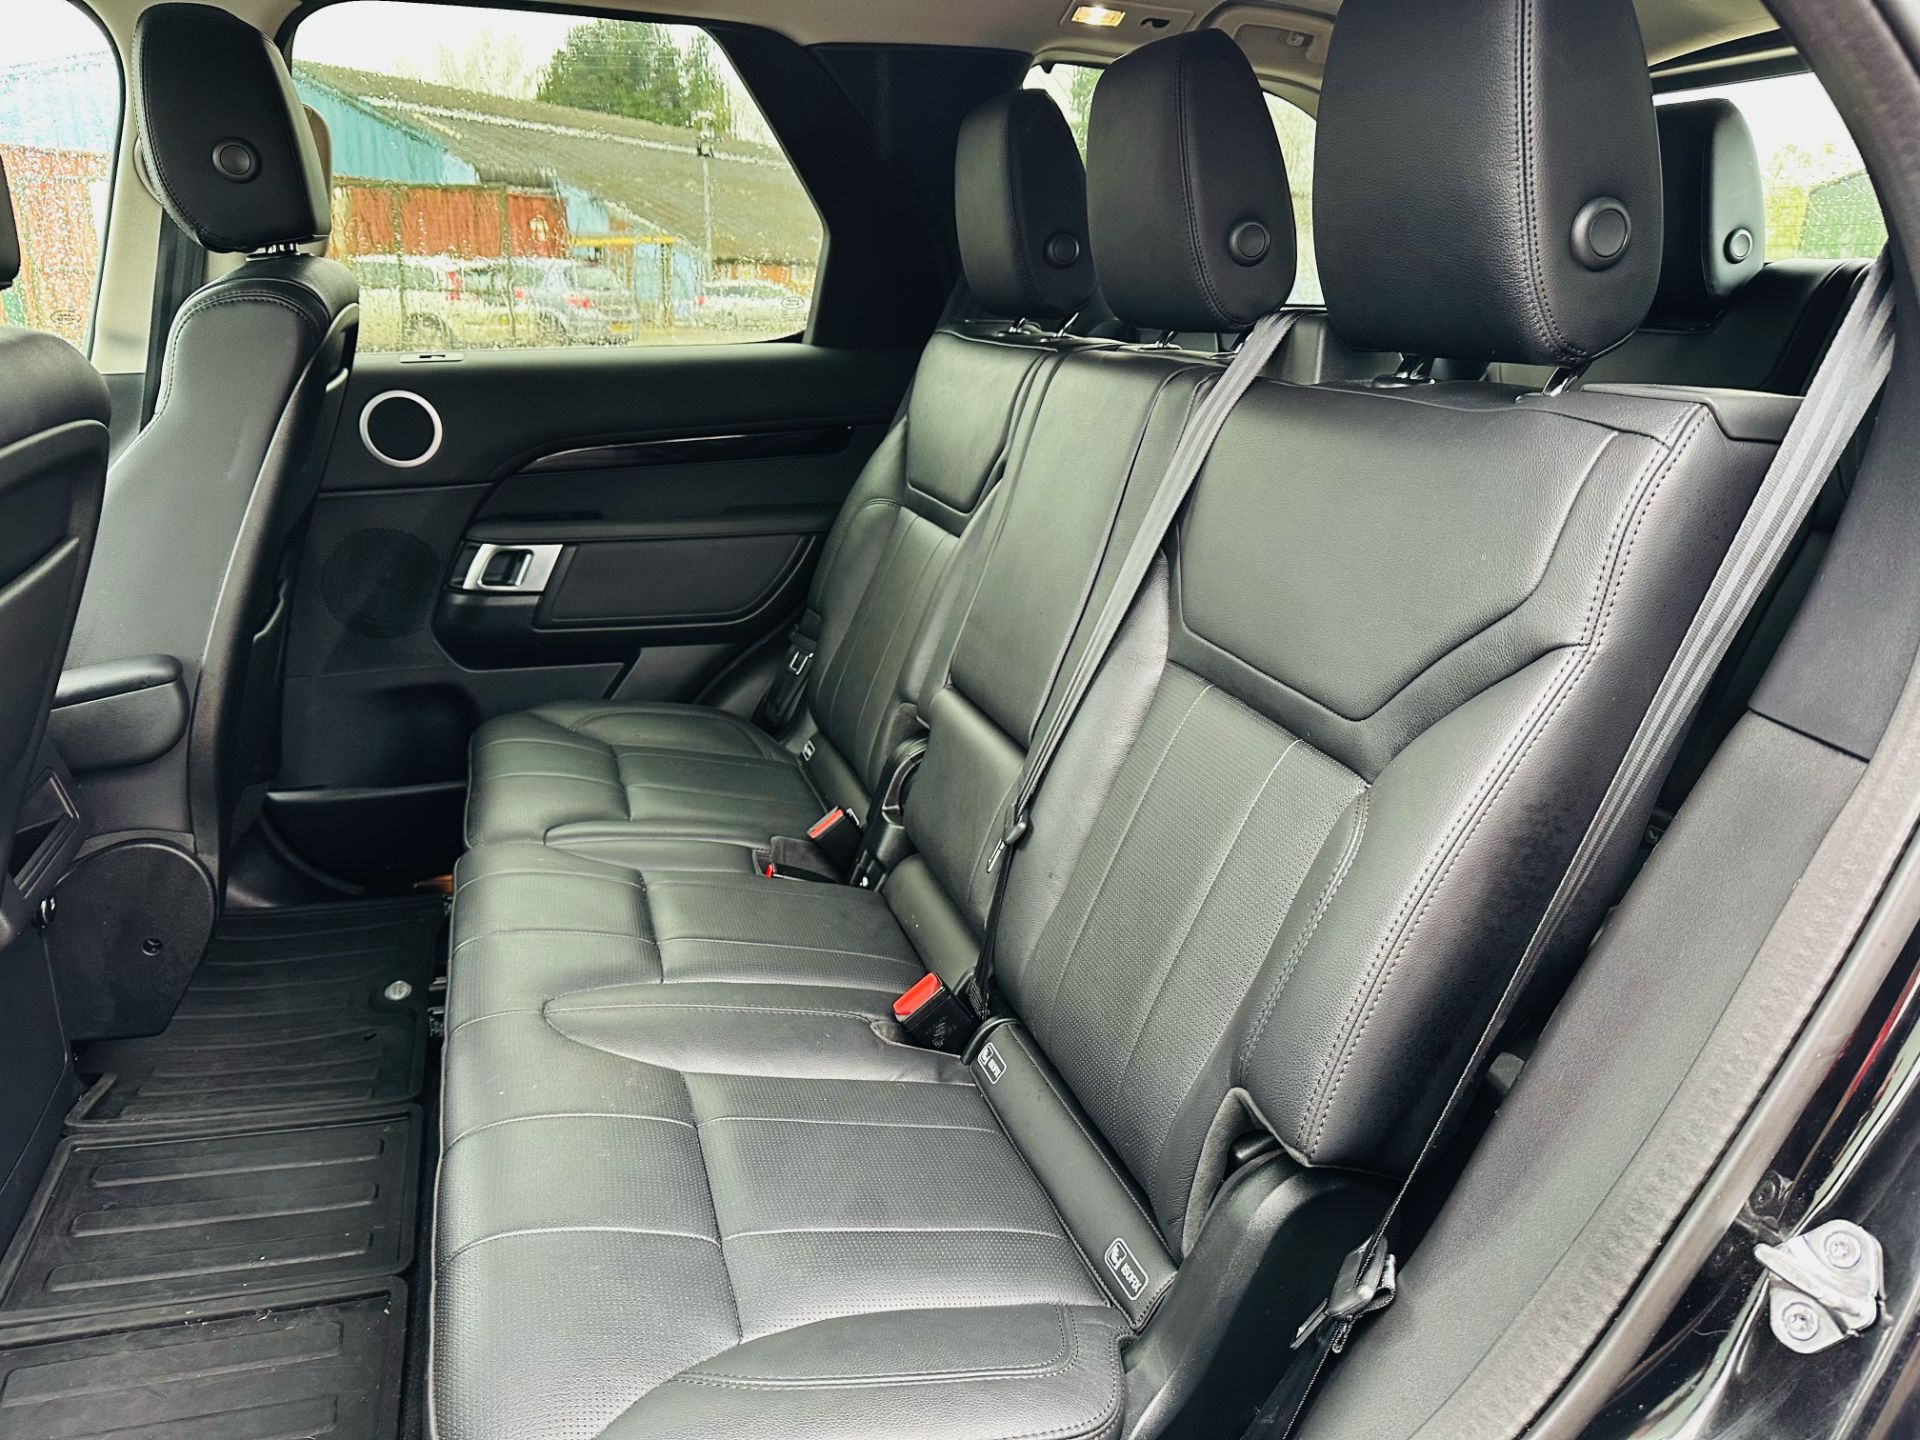 (Reserve Met) Land Rover Discovery SE Automatic (Black Edition) - 2020 Model - Only 57k Miles! - Image 18 of 40